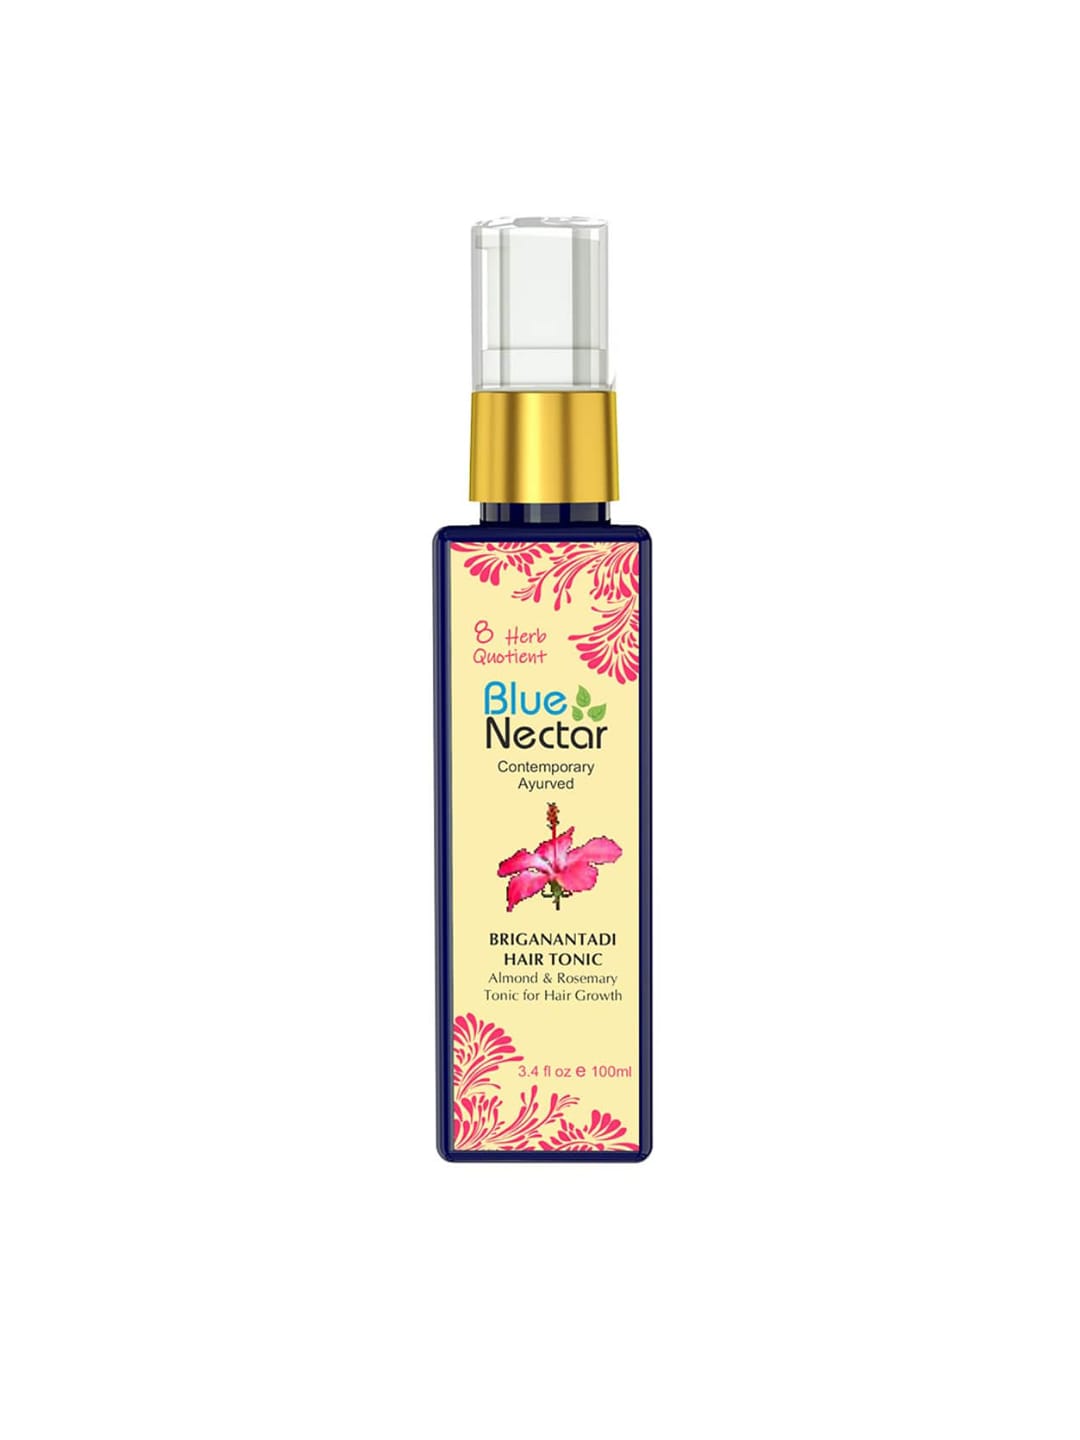 Blue Nectar Hair Spray Tonic with Almond & Rosemary Oil for Smooth Styling 8 Herbs - 100ml Price in India